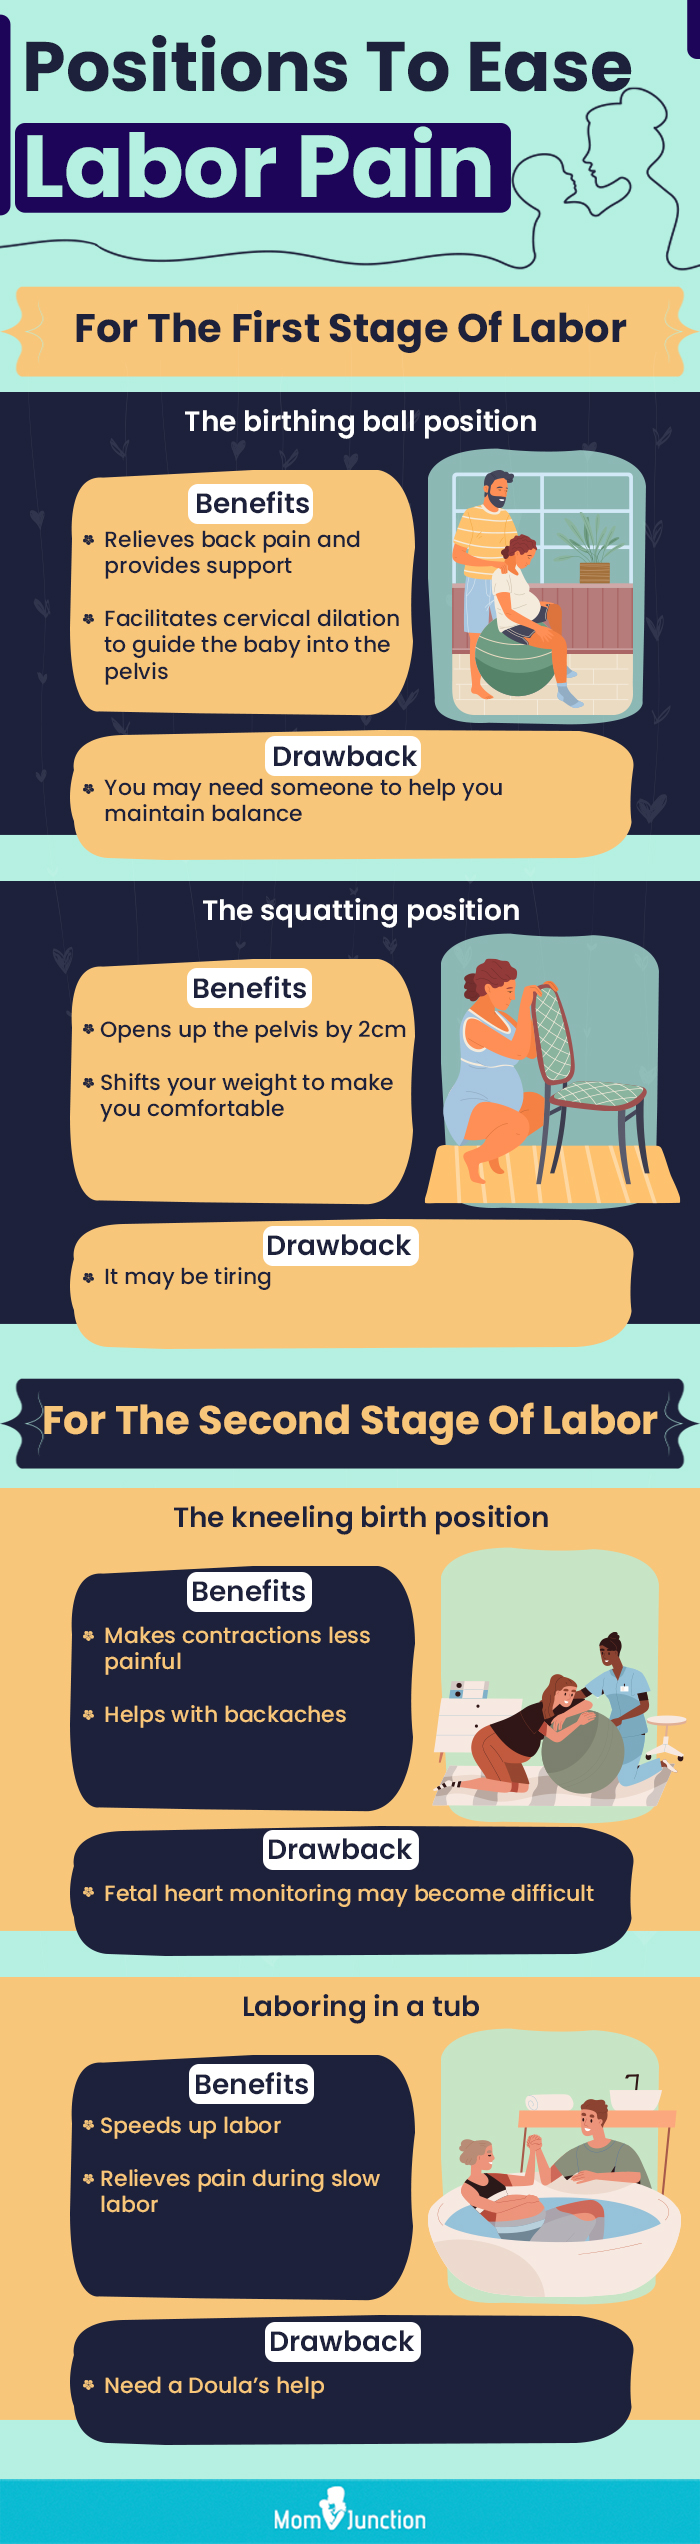 5 Ways to Focus During Labor